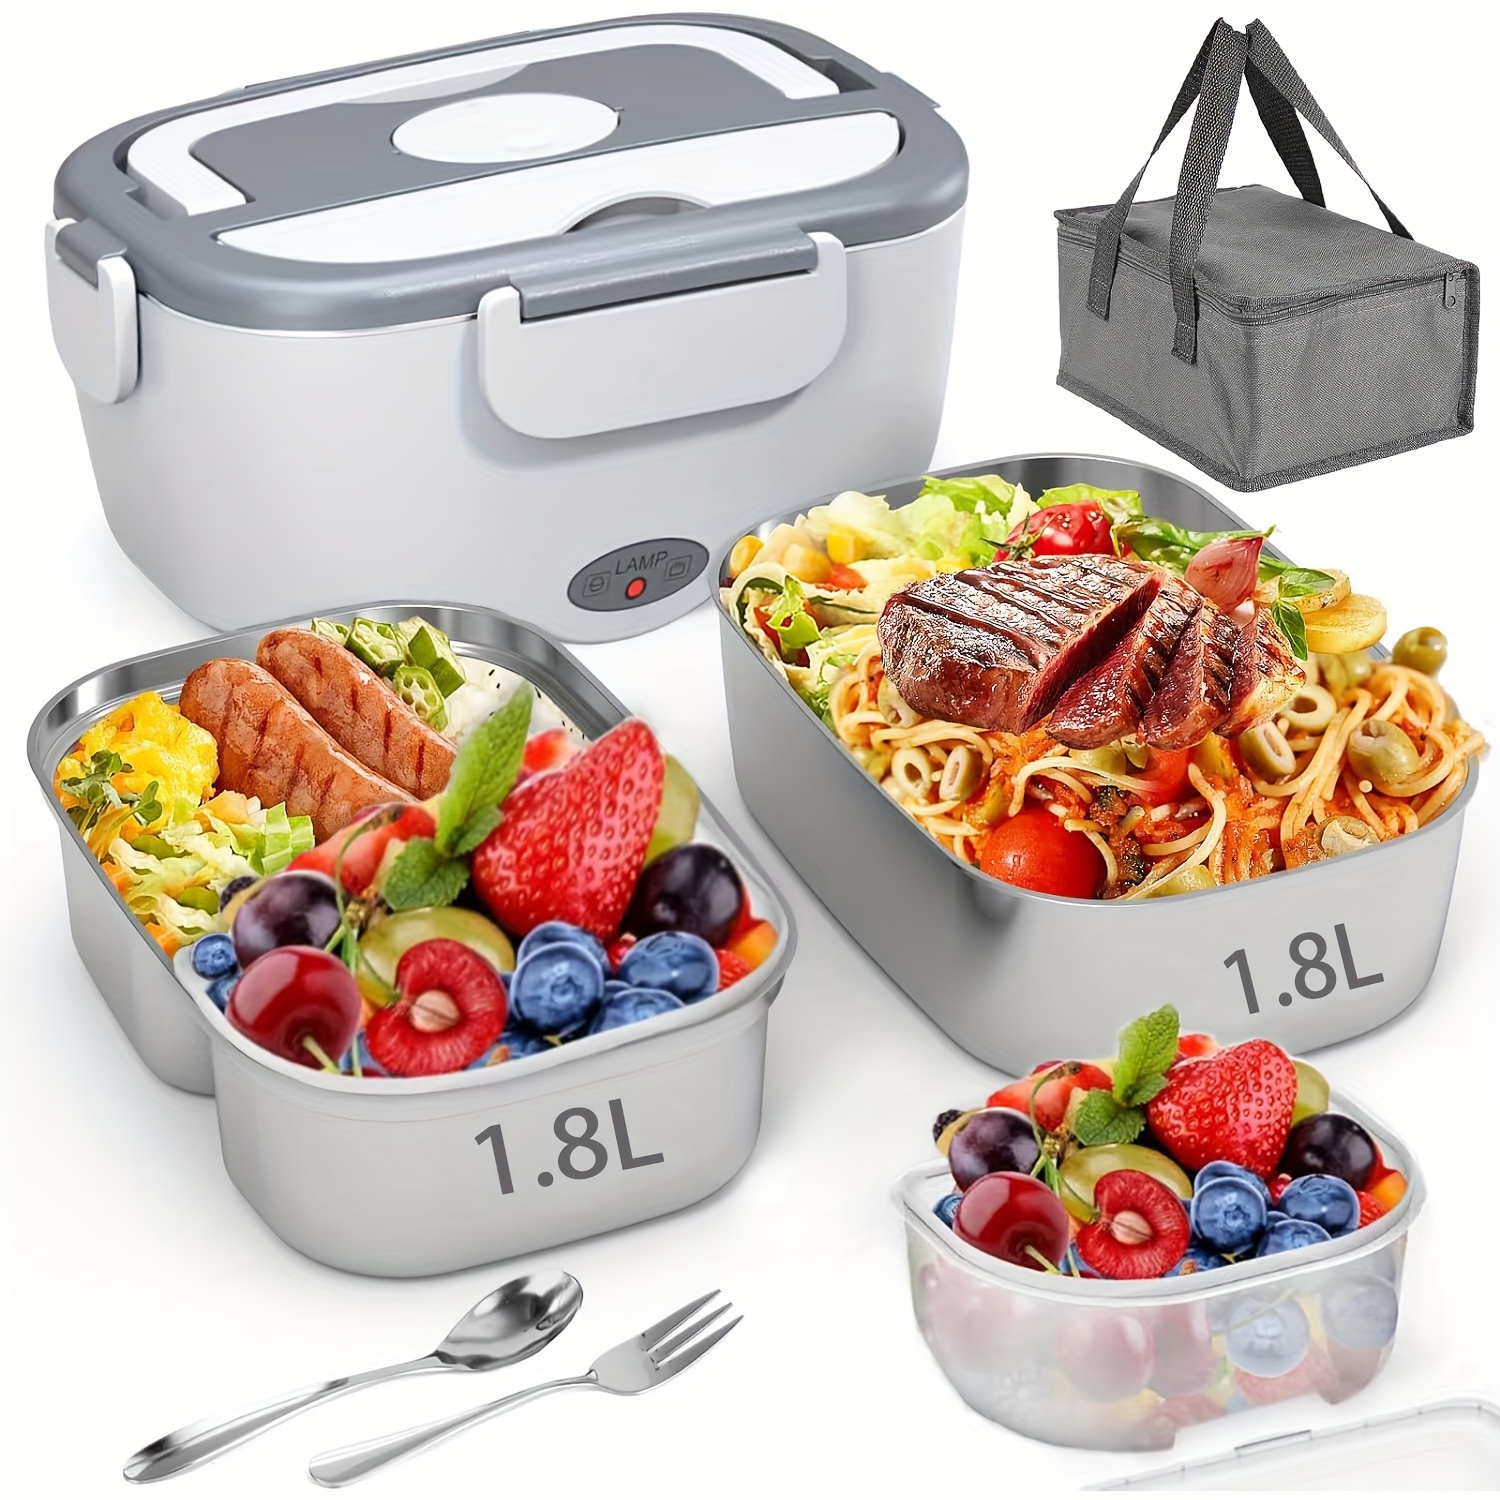 

Electric Lunch Box, 3 In 1 Heated Lunch Box For Adults, Portable Heating Lunch Box With 1.8l Removable Stainless Steel Container For Office/car/truck, 110v 24v 12v And Insulated Carry Bag